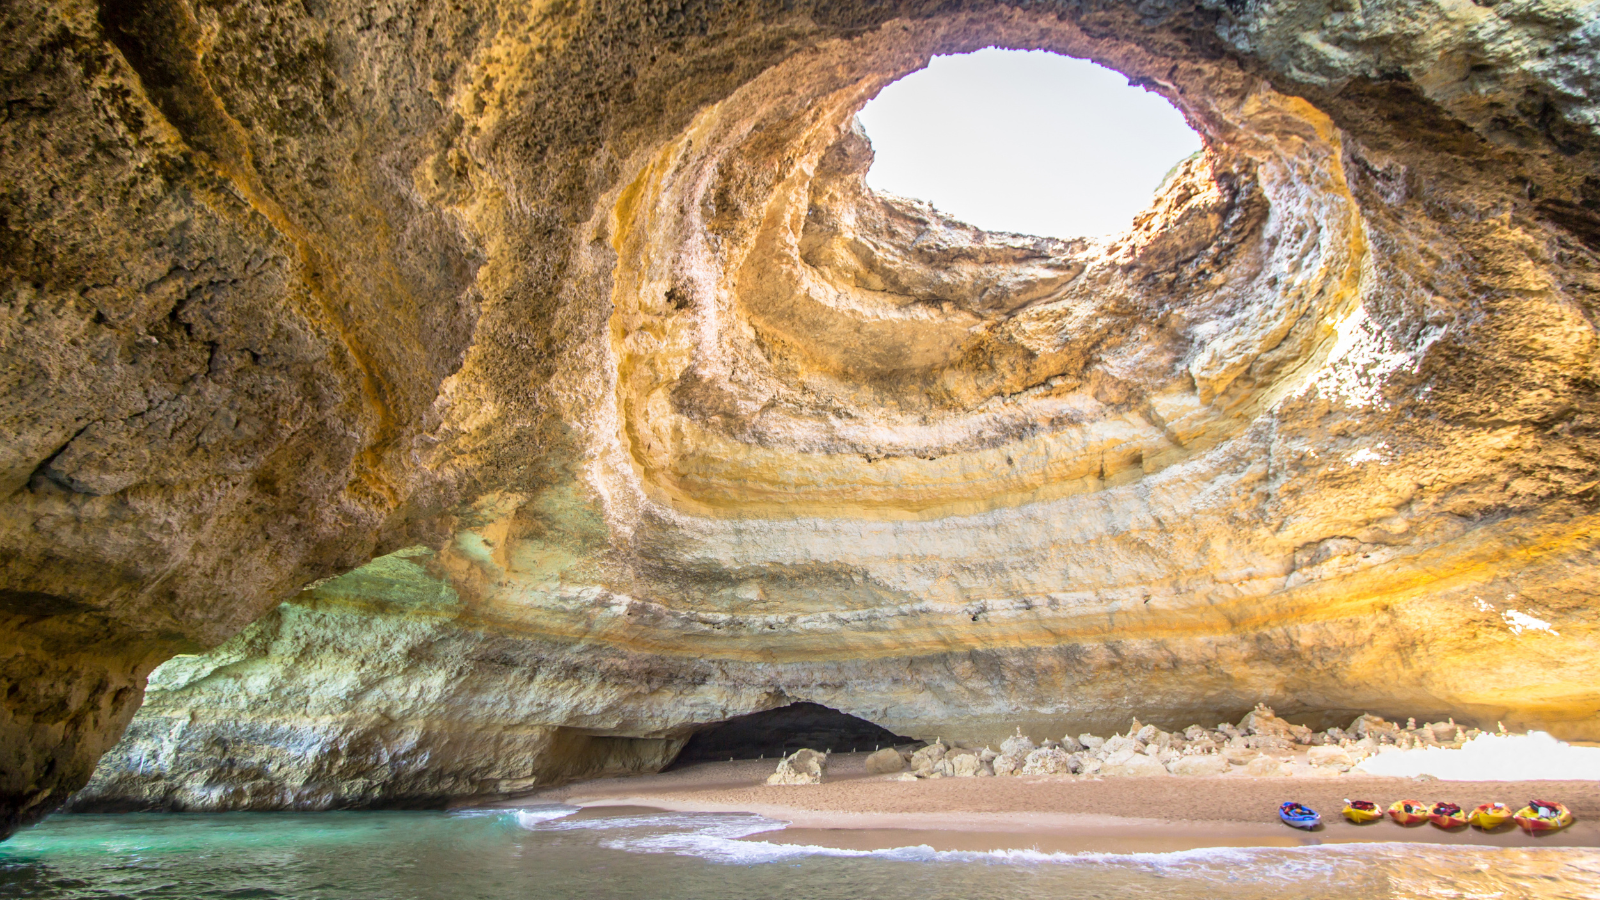 Explore the beautiful Benagil sea caves - the fifth thing in the list of 10 best things to do in Portugal